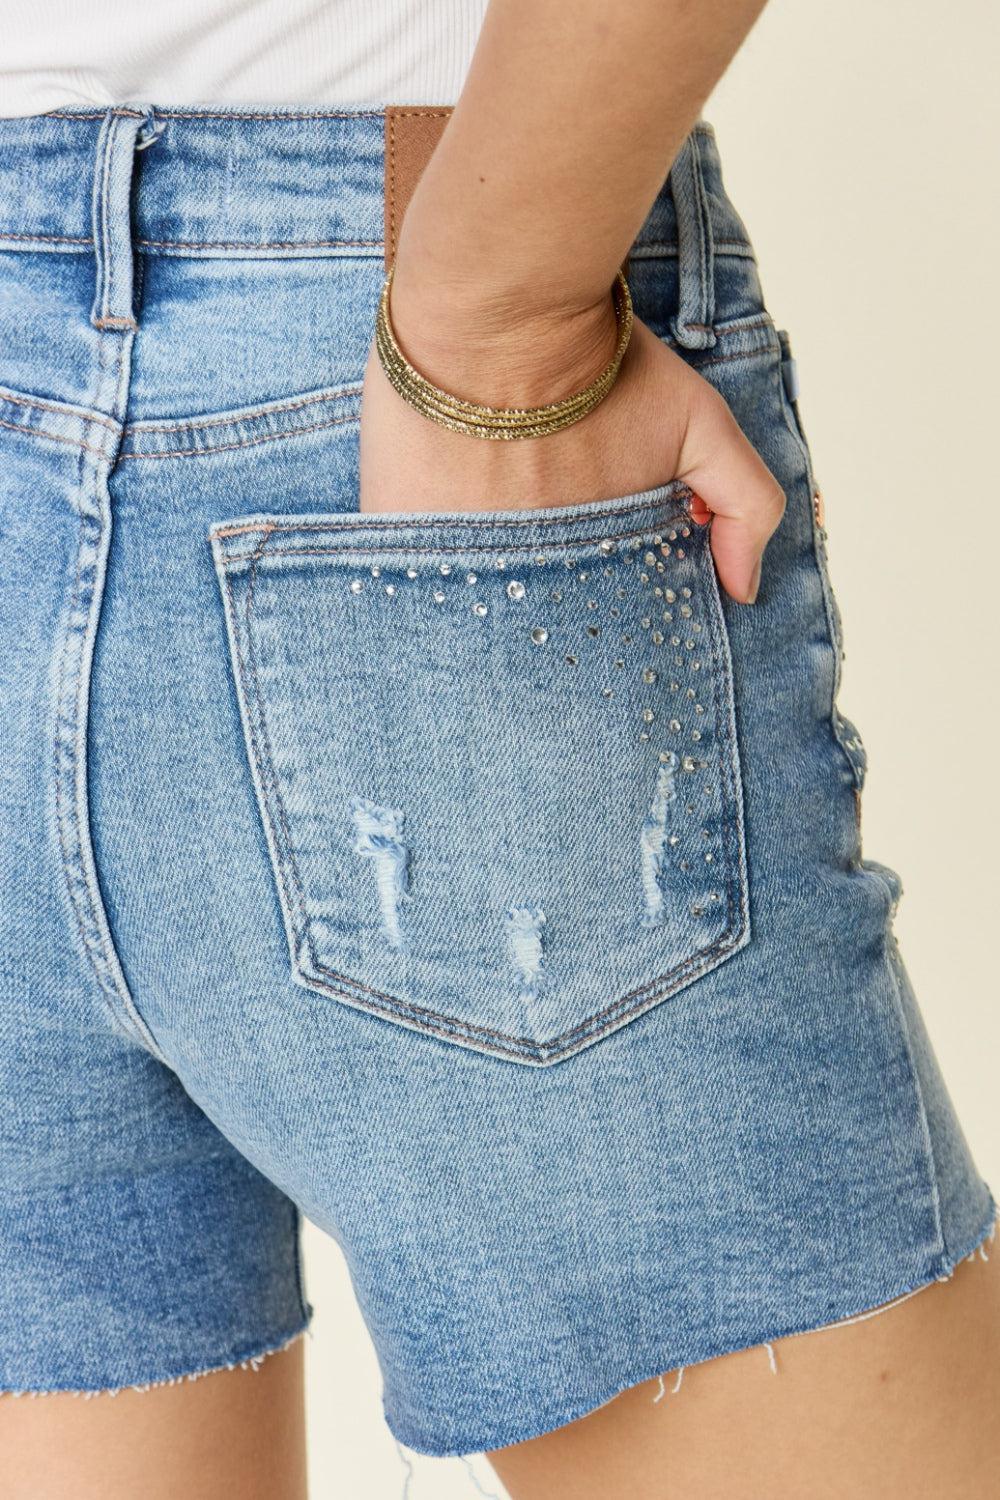 a woman is wearing a pair of shorts with holes in it